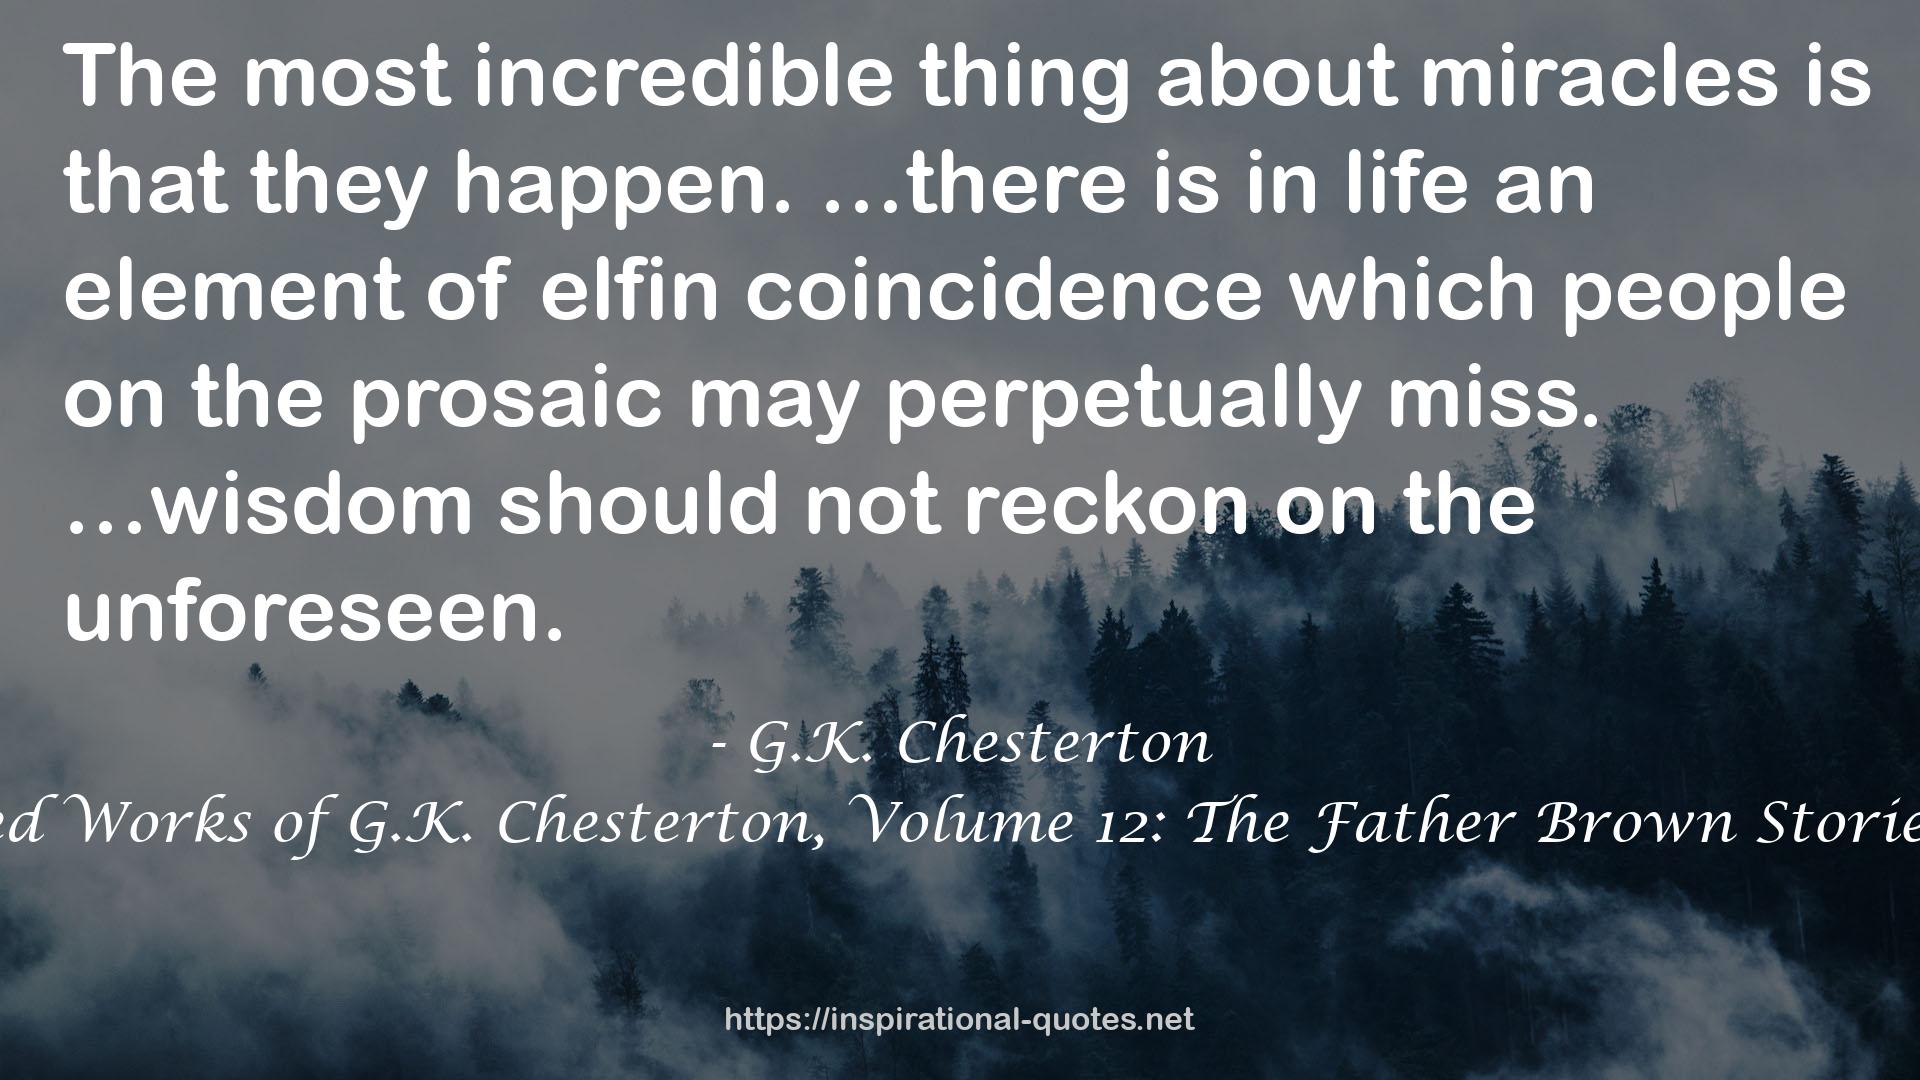 The Collected Works of G.K. Chesterton, Volume 12: The Father Brown Stories, Volume I QUOTES